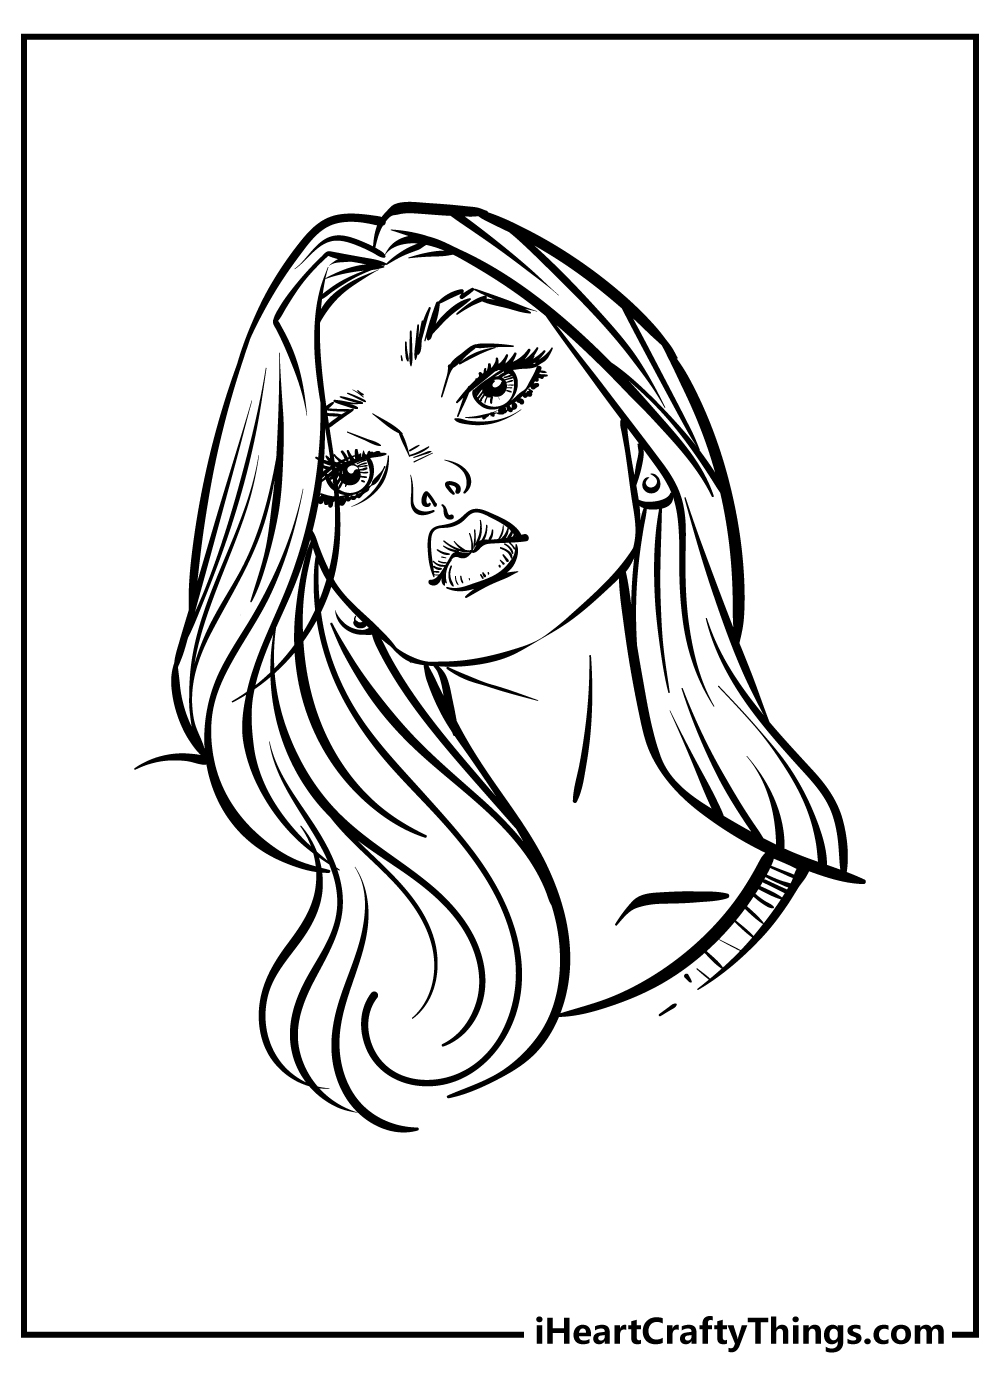 Girly Coloring Pages for adults free printable